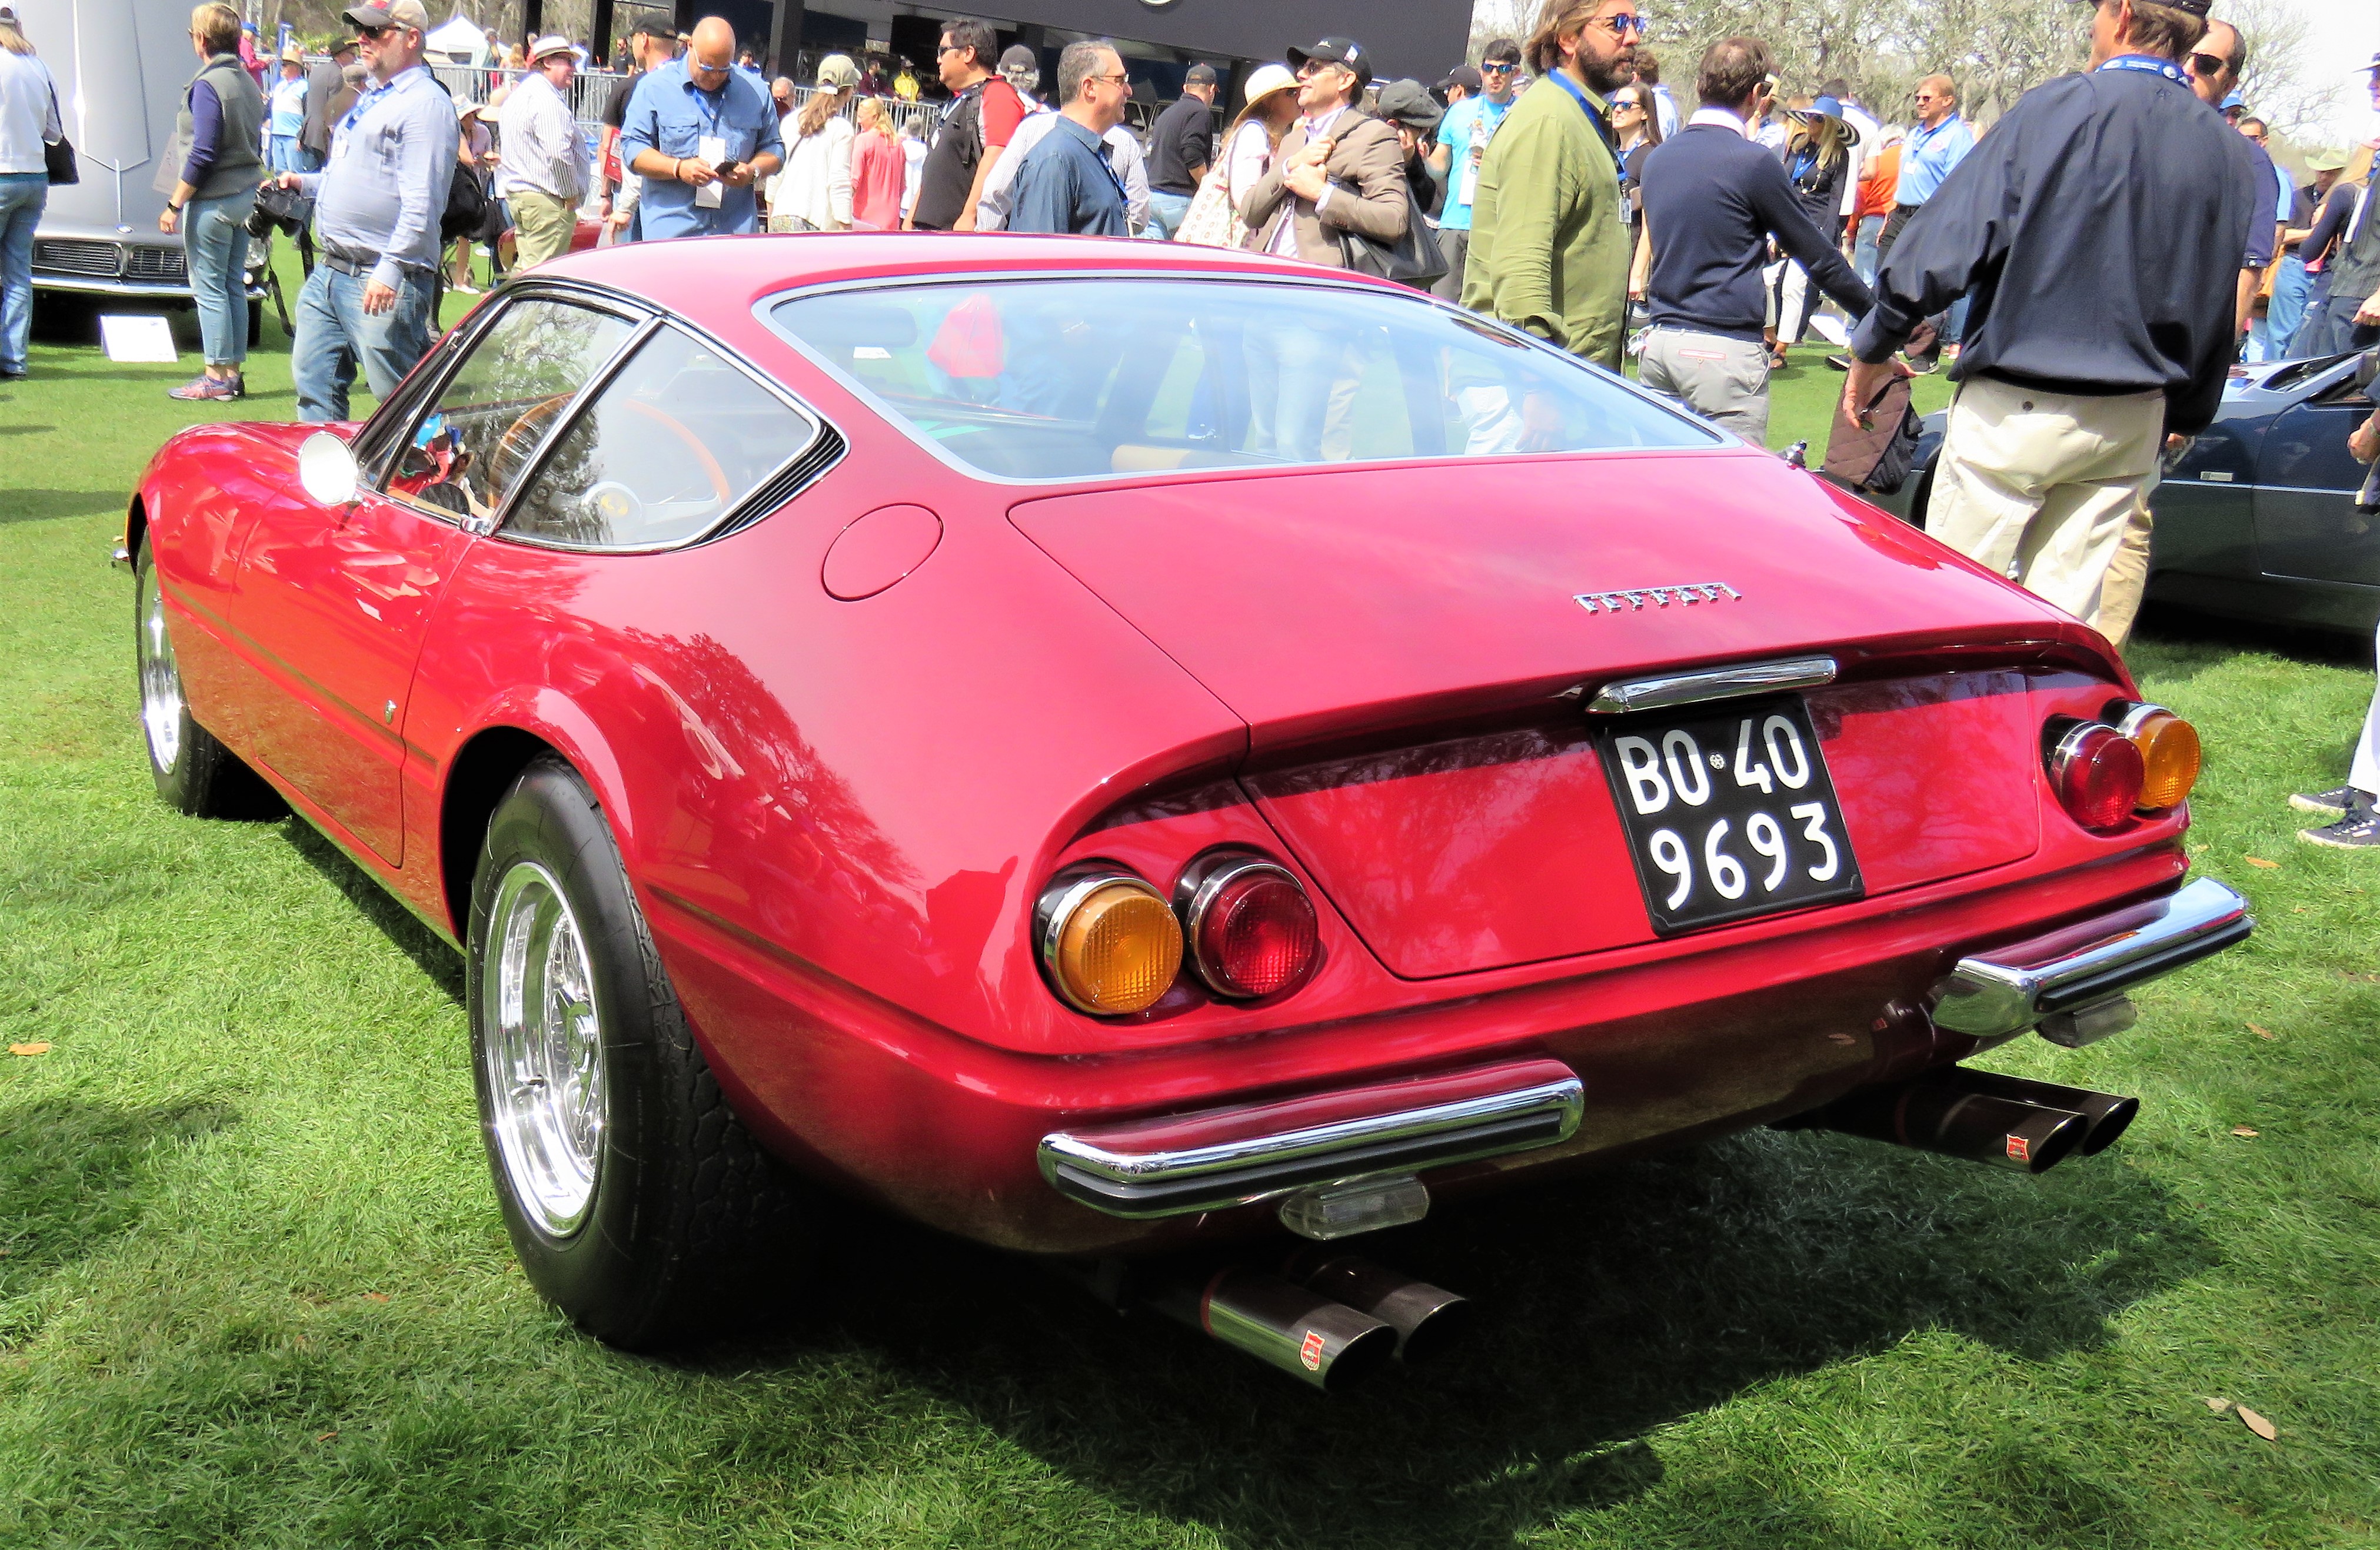 , Tales of the classics: Amelia concours owners, experts talk cars, ClassicCars.com Journal